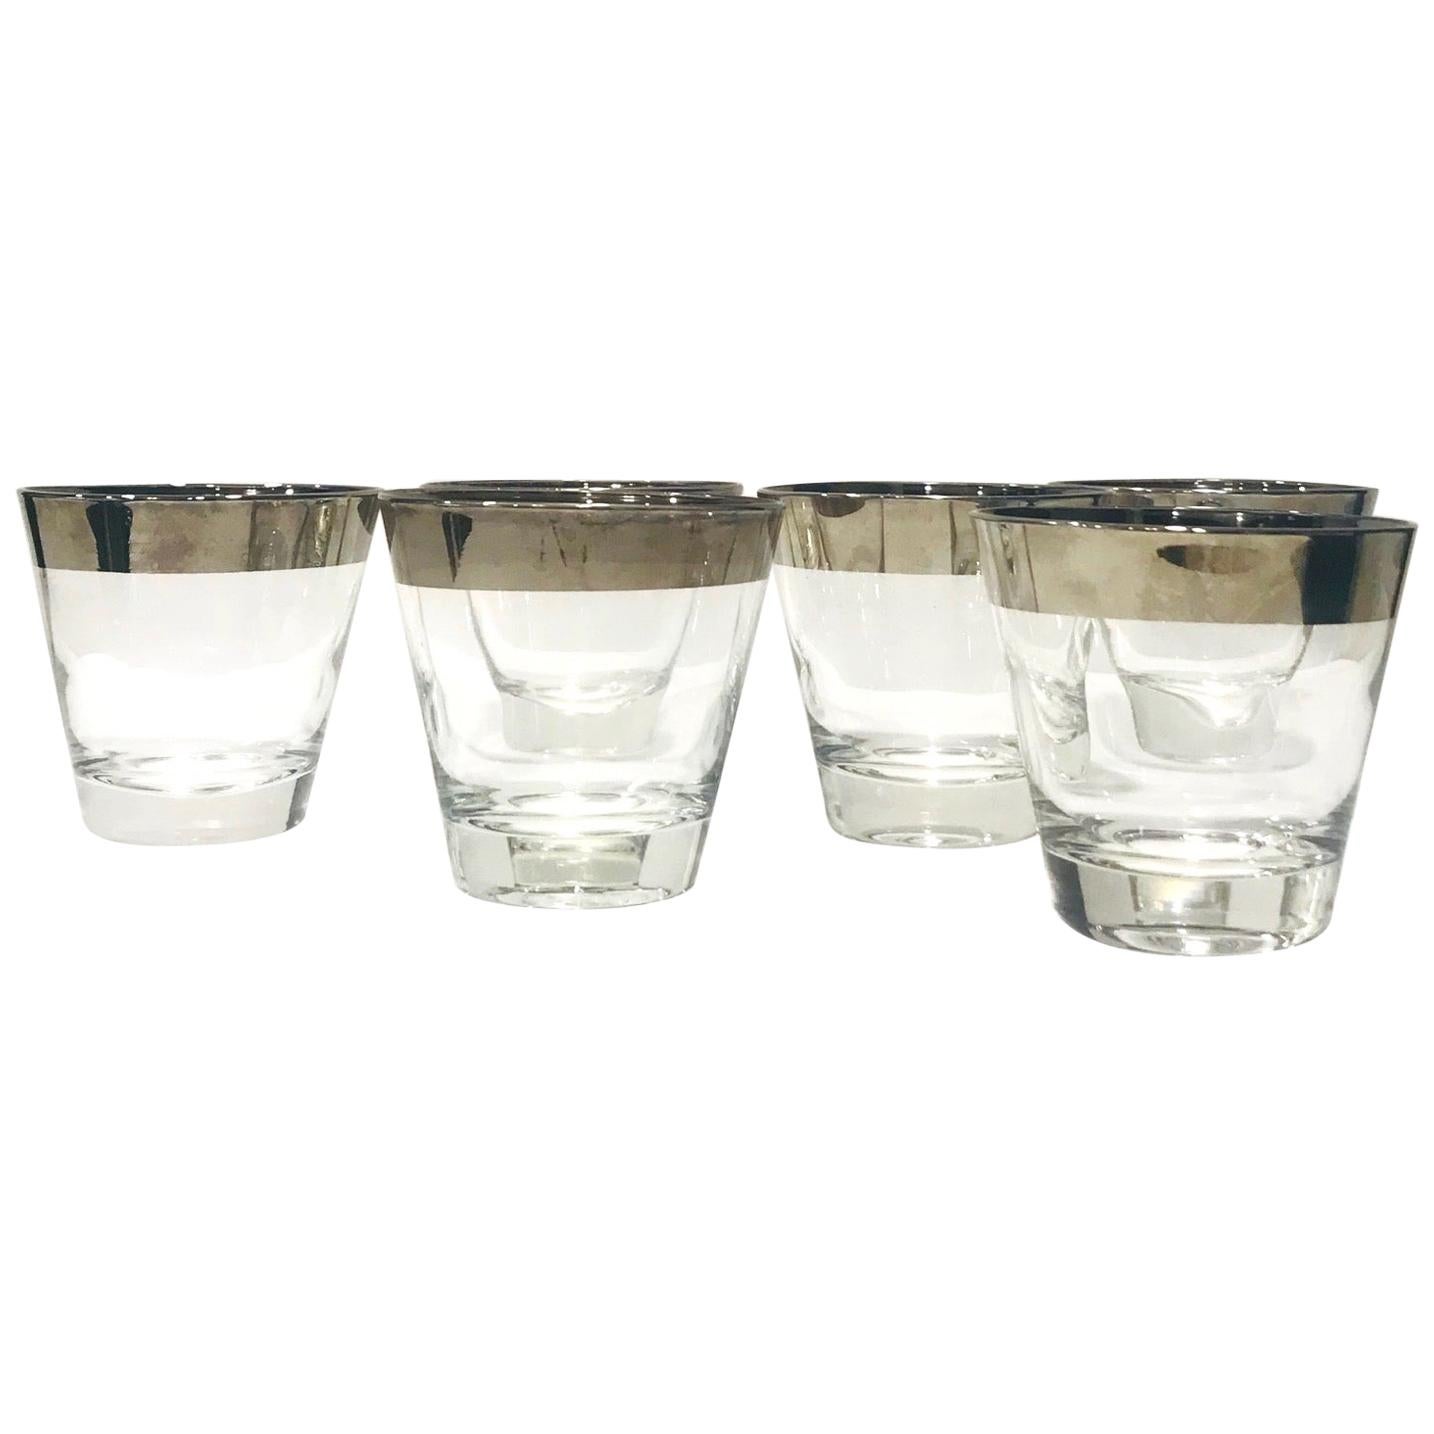 Set of Six Barware Glasses with Silver Overlay by Dorothy Thorpe, circa 1960